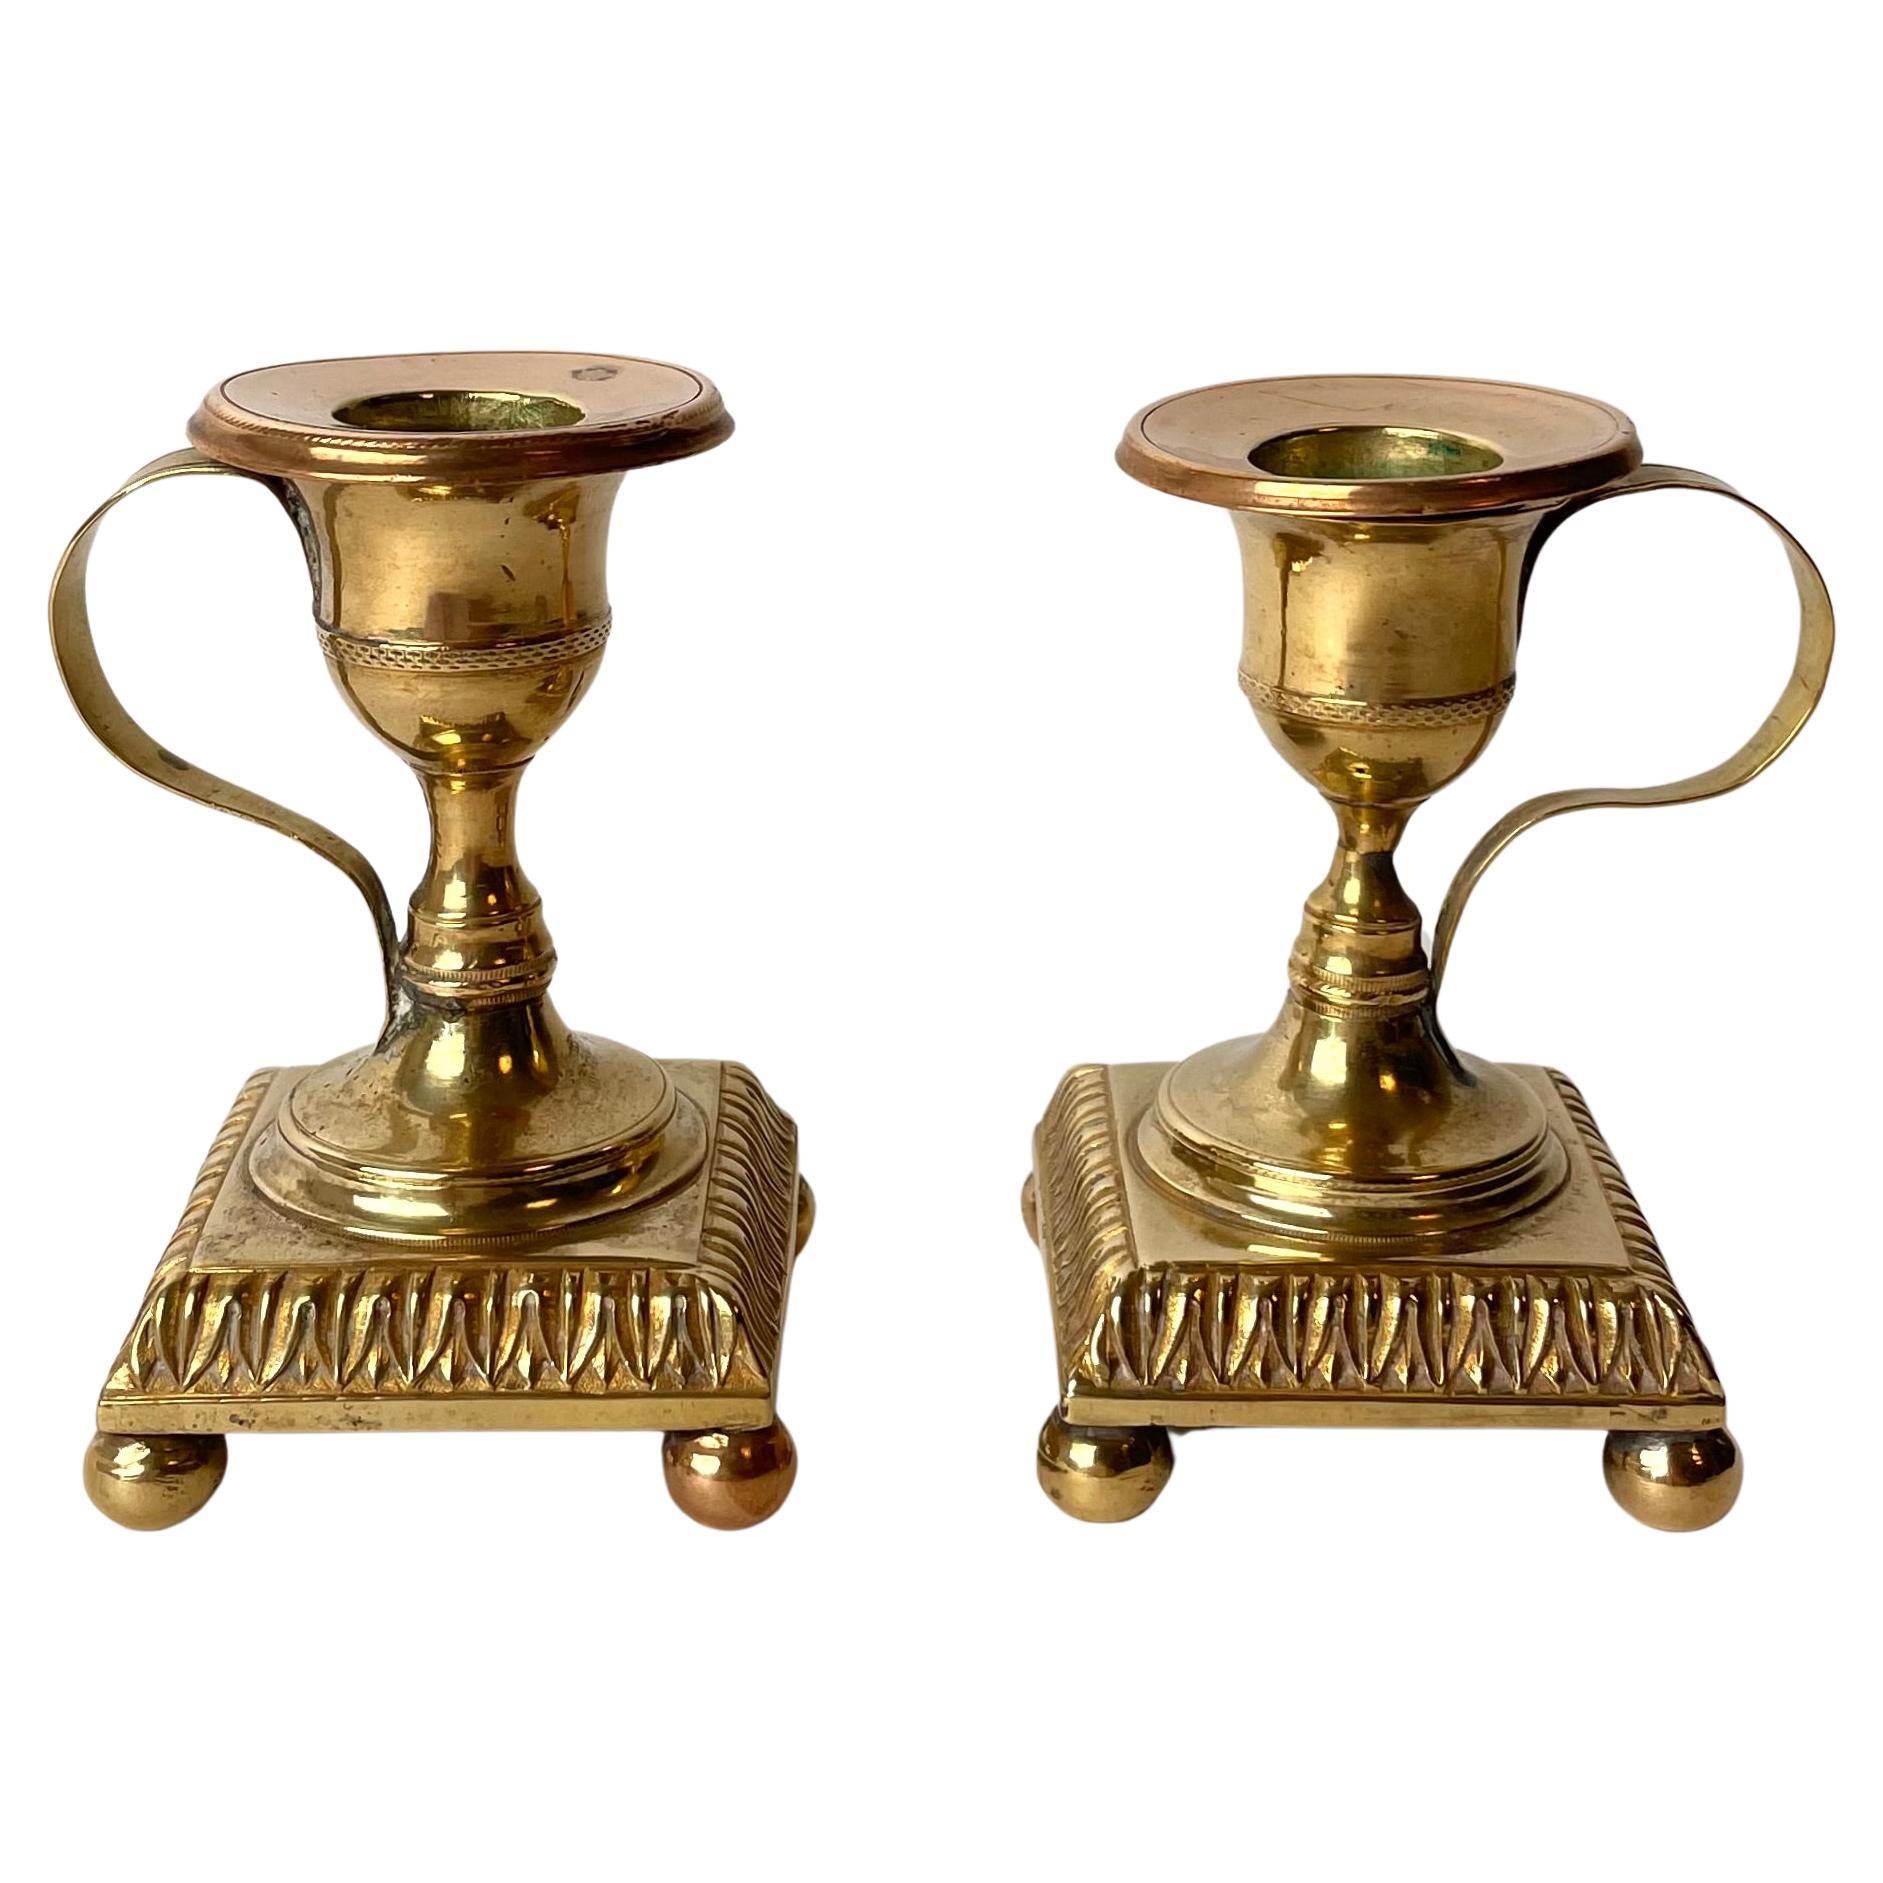 Small Pair of Gustavian Night Candlesticks from the, Late 18th Century For Sale